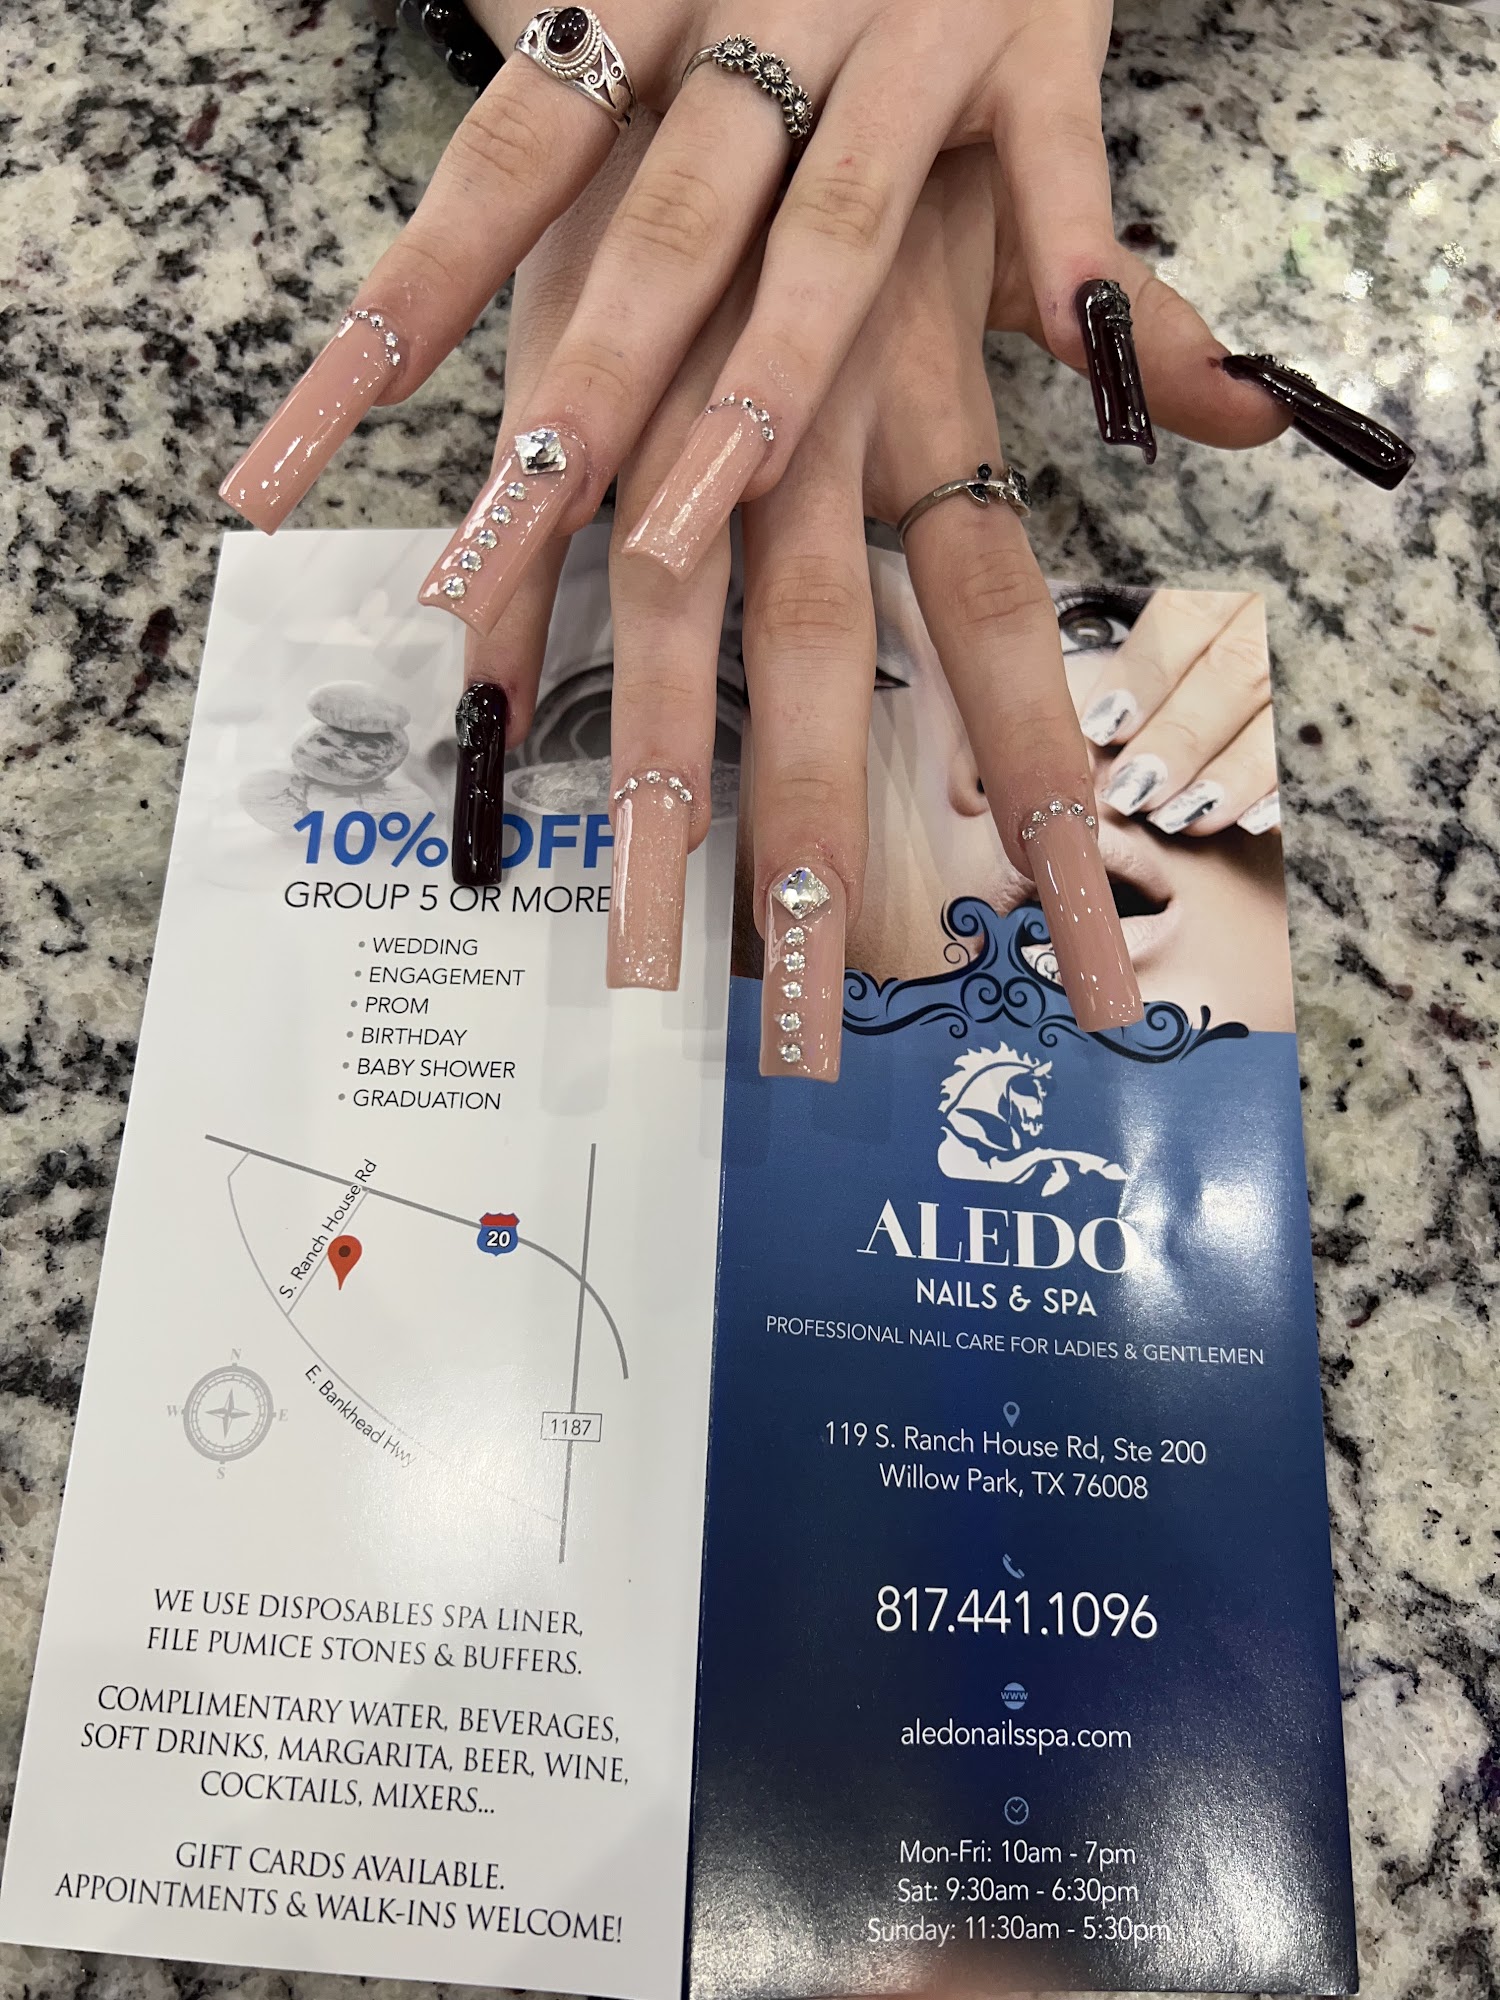 Aledo Nails & Spa 119 S Ranch House Rd #200, Willow Park Texas 76008